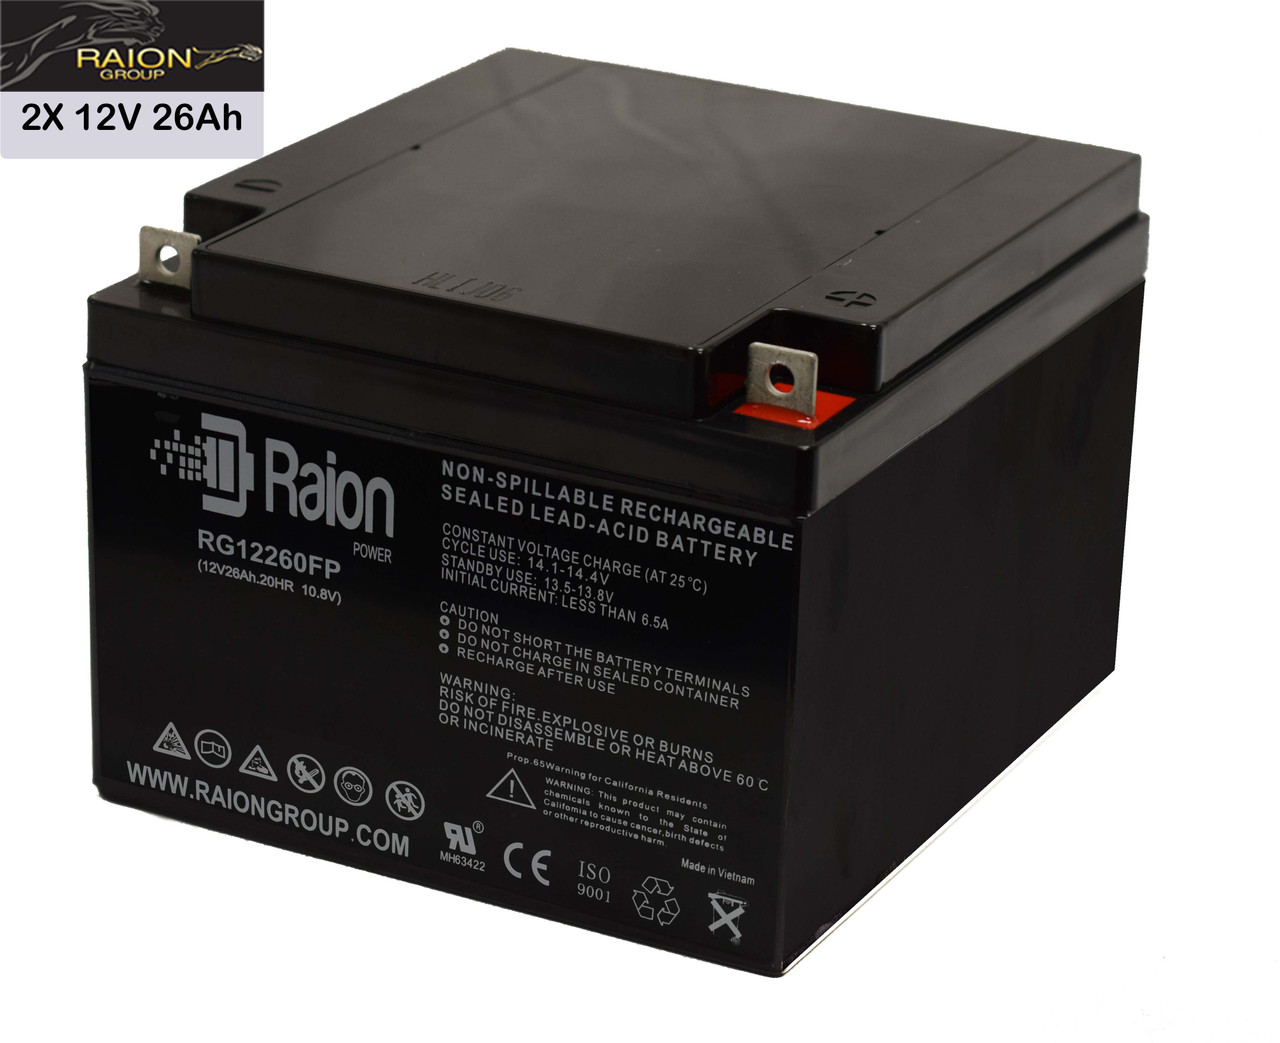 Raion Power Replacement 12V 26Ah RG12260FP Battery for Medical Lab Automation Model 5CT - 2 Pack